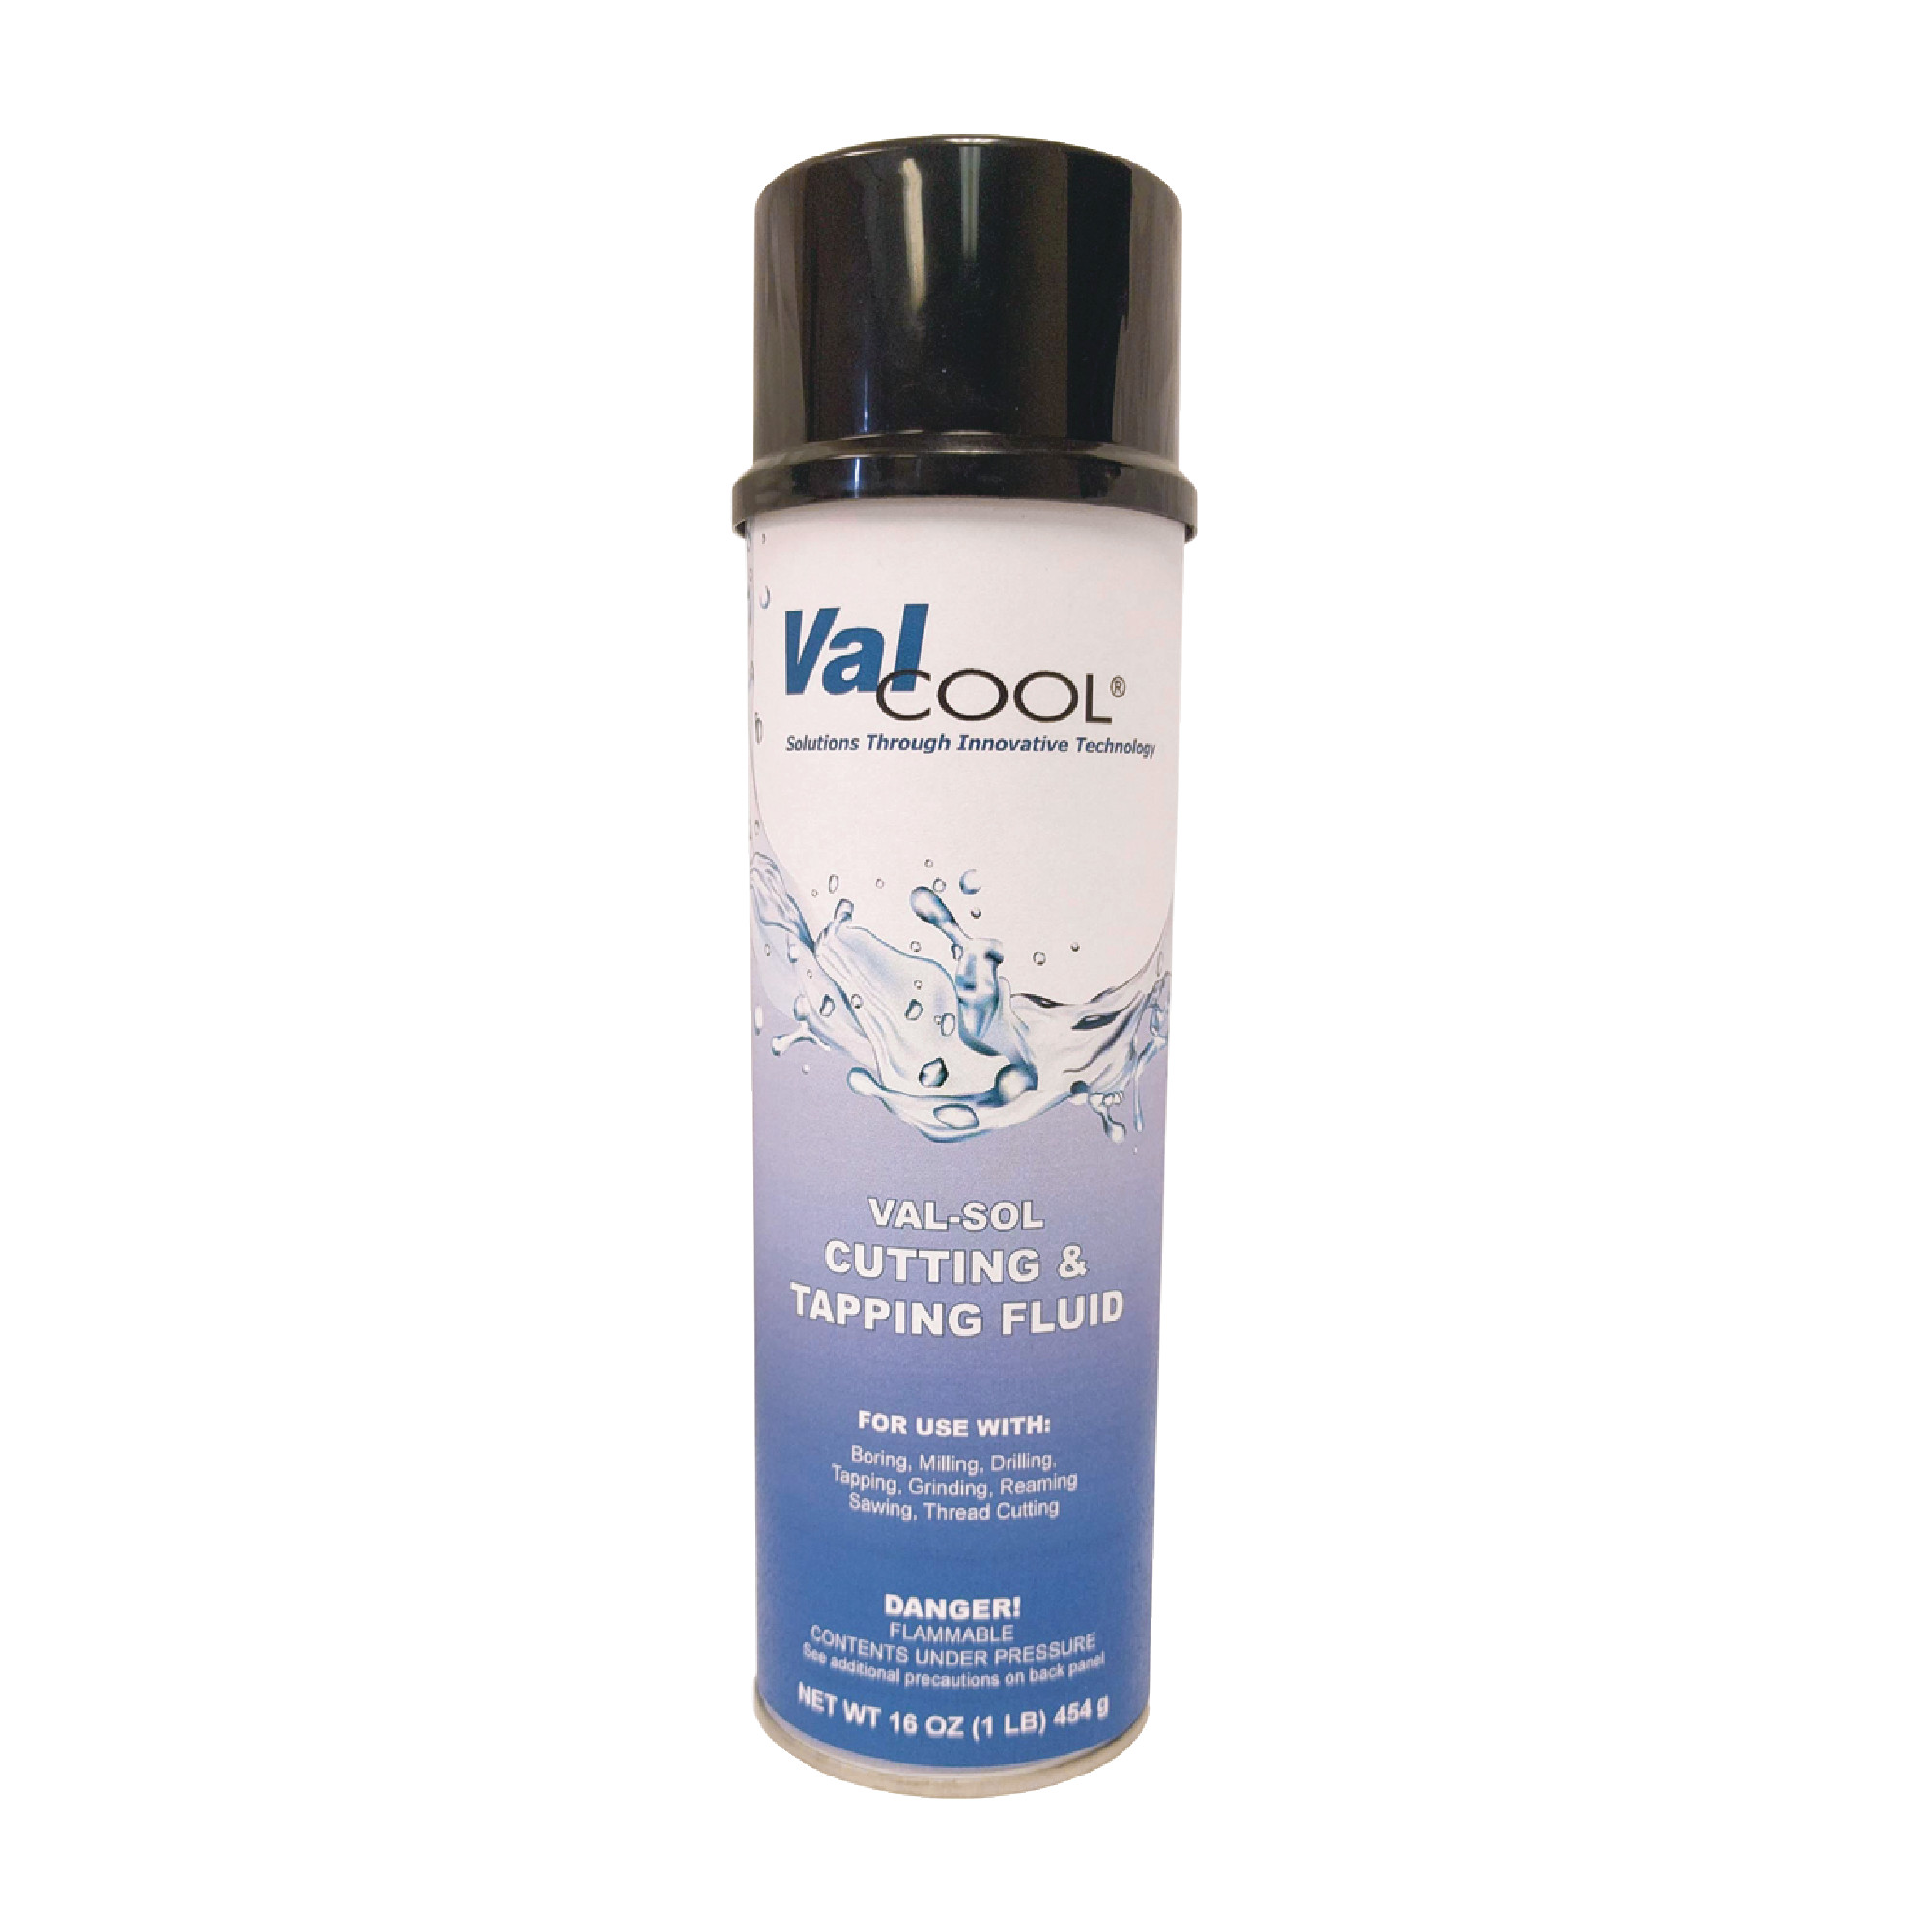 VALCOOL Val-Sol Cutting & Tapping Fluid